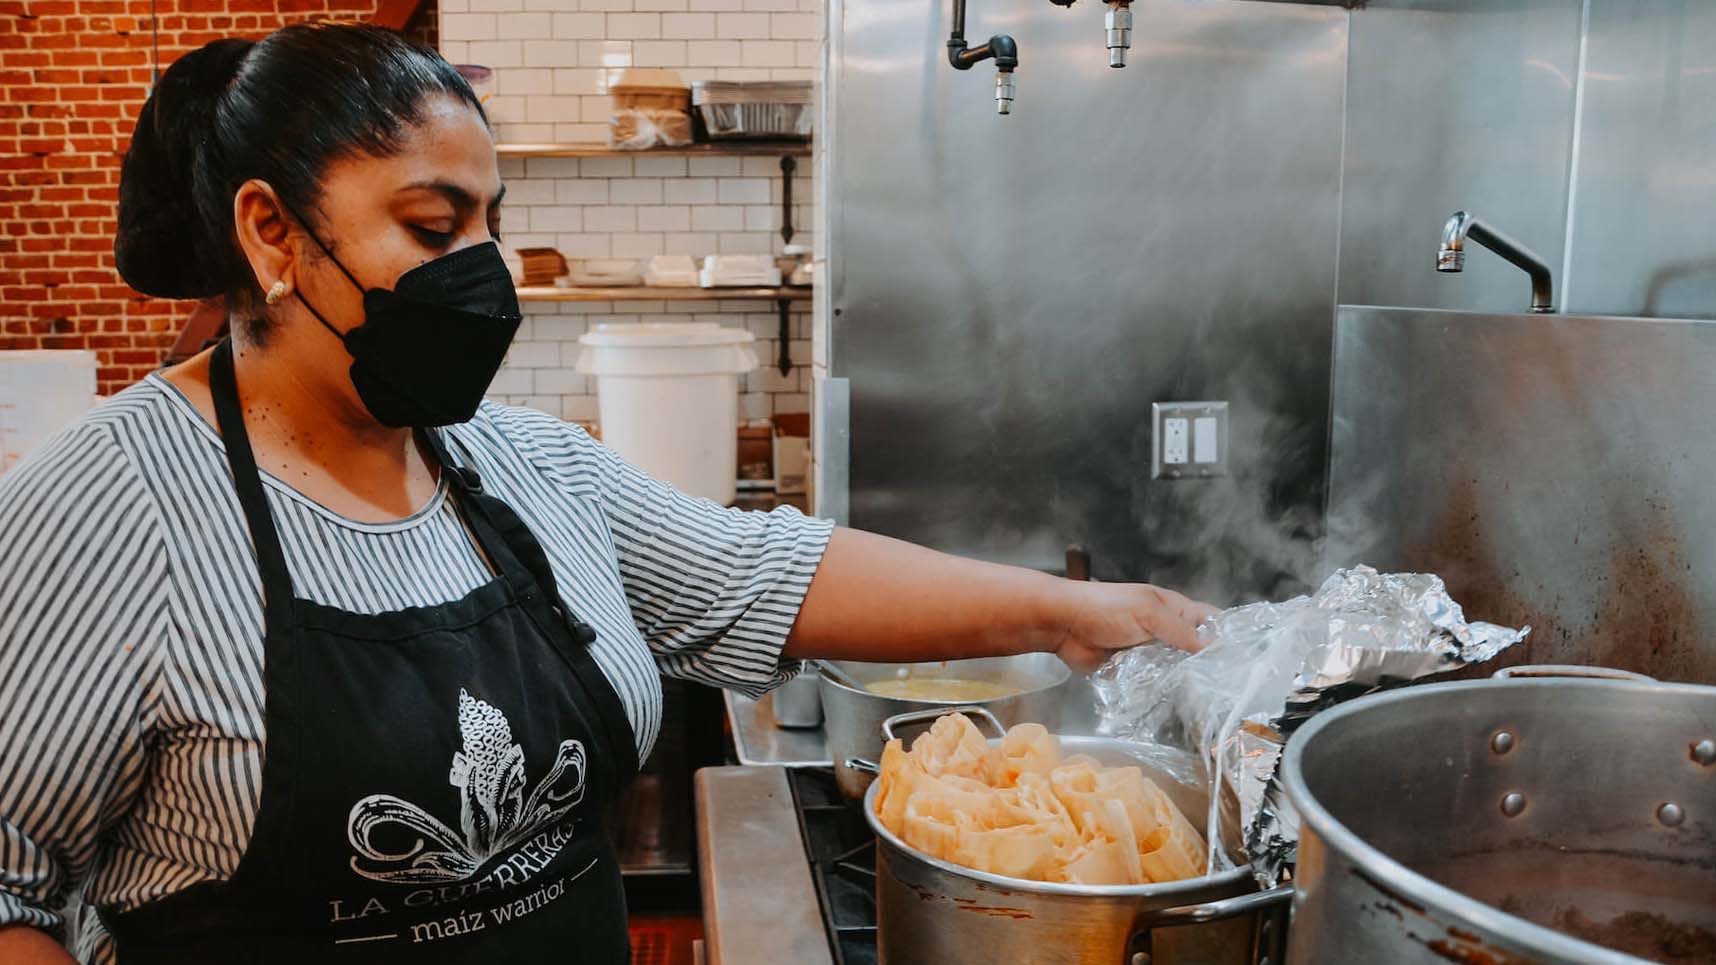 Ofelia Barajas shows tamales on stove at La Guerrera's Kitchen in Oakland, CA. August 2021